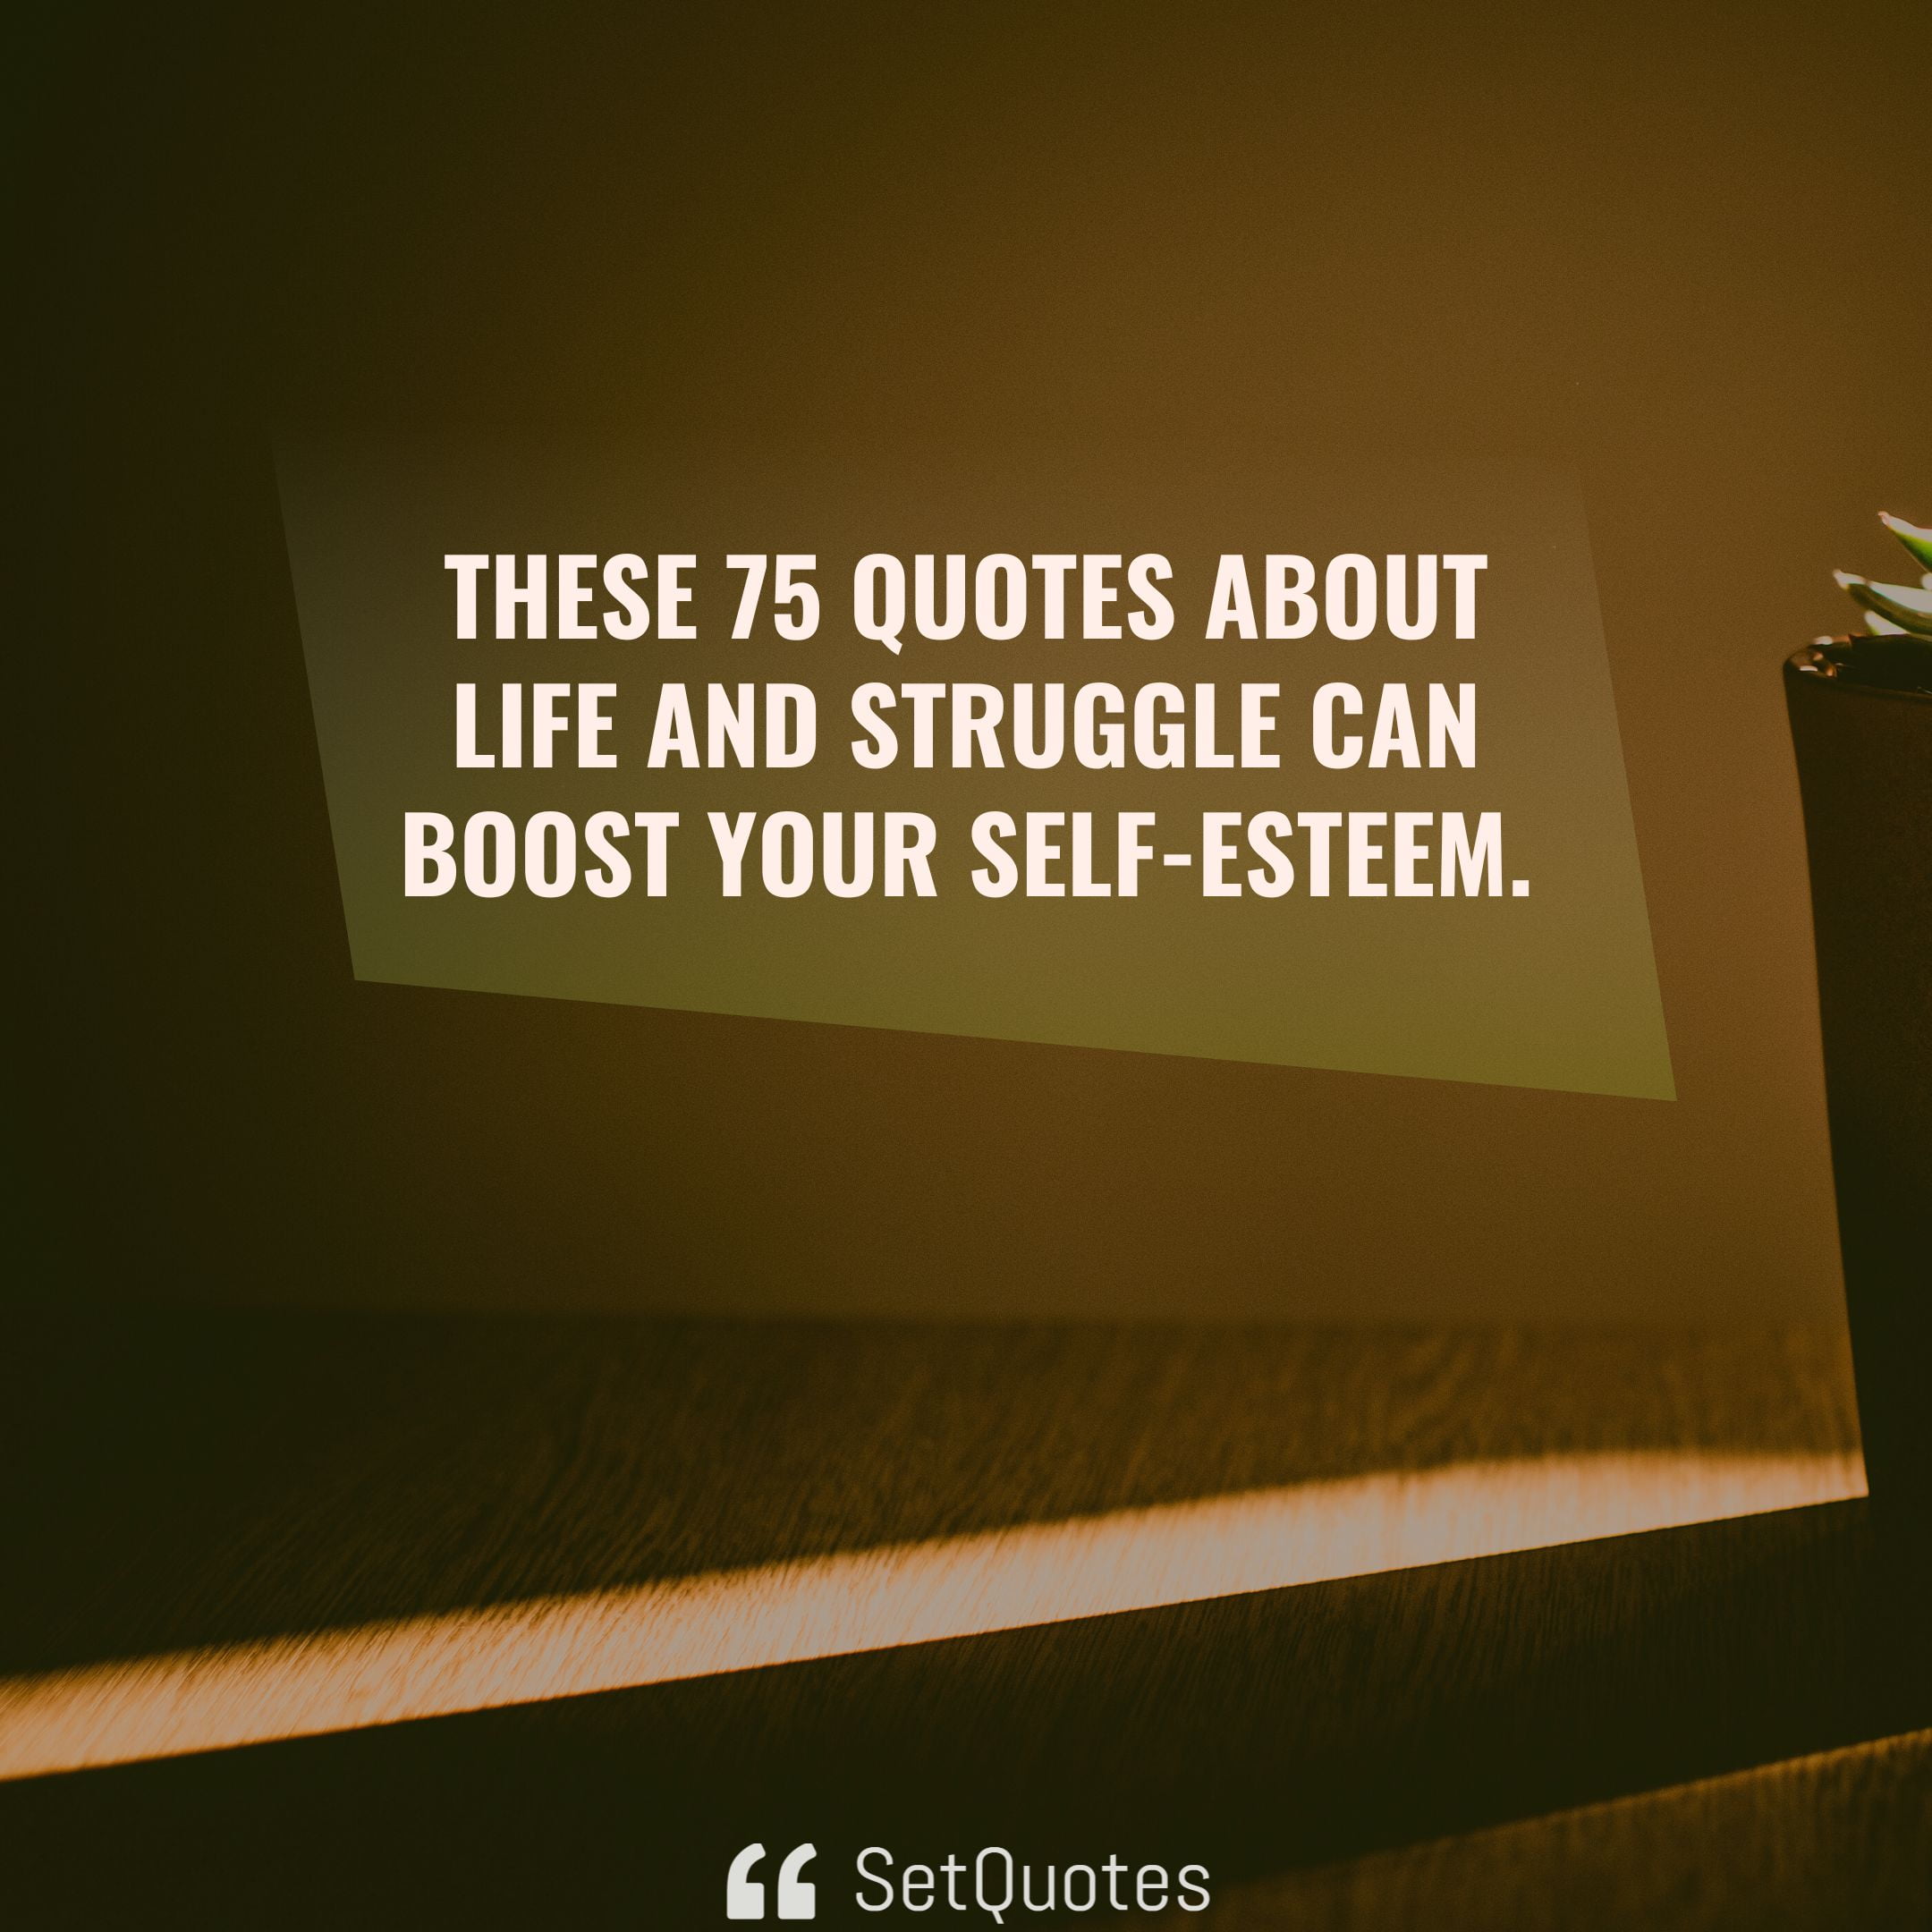 75 Great Inspirational Quotes About Life And Struggles To Boost Yourself. - SetQuotes